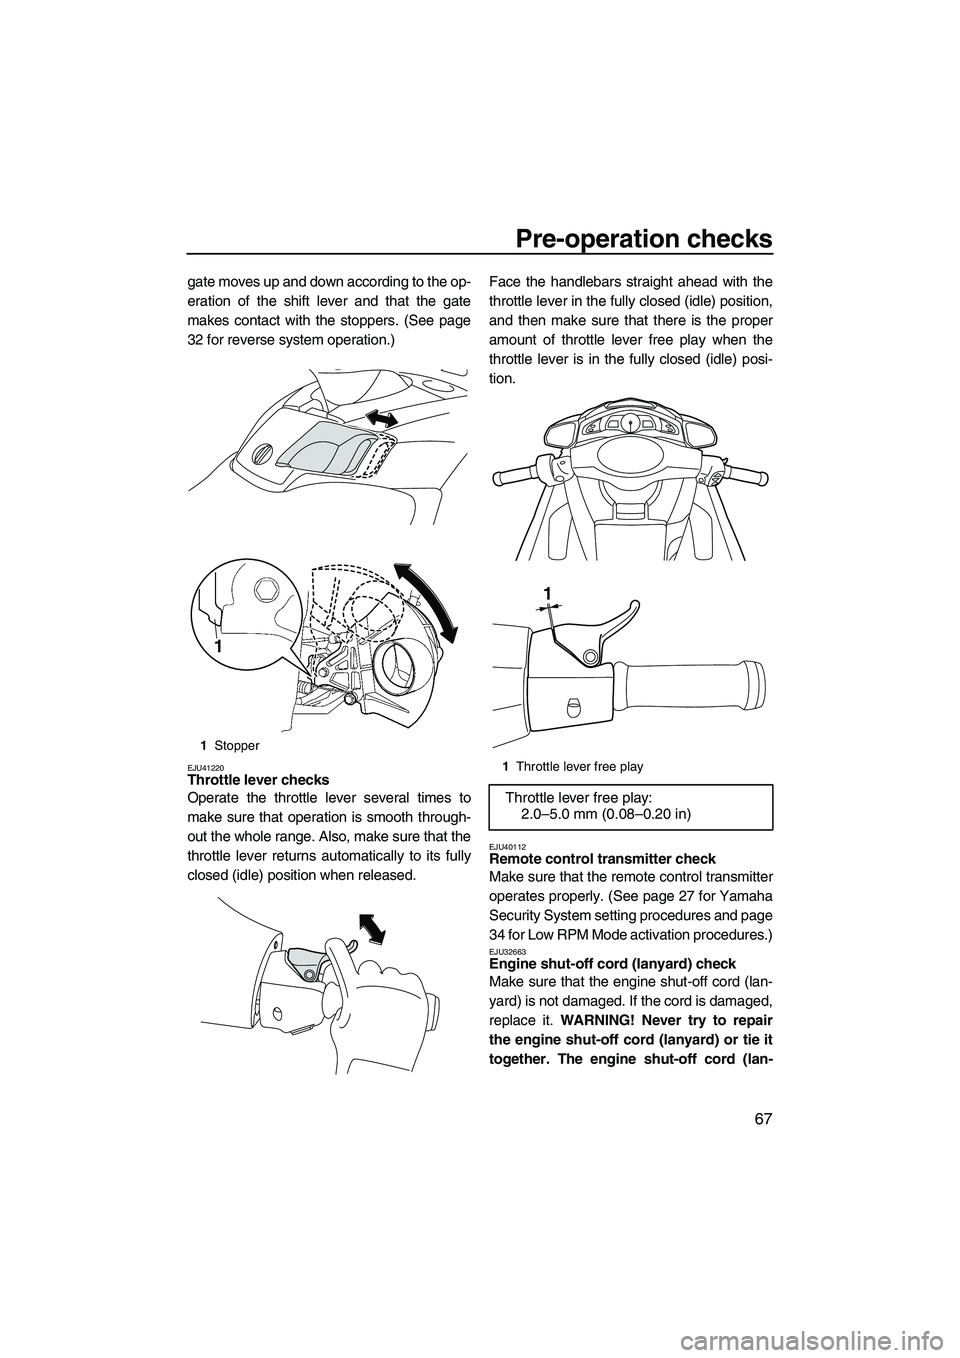 YAMAHA SVHO 2011  Owners Manual Pre-operation checks
67
gate moves up and down according to the op-
eration of the shift lever and that the gate
makes contact with the stoppers. (See page
32 for reverse system operation.)
EJU41220Th